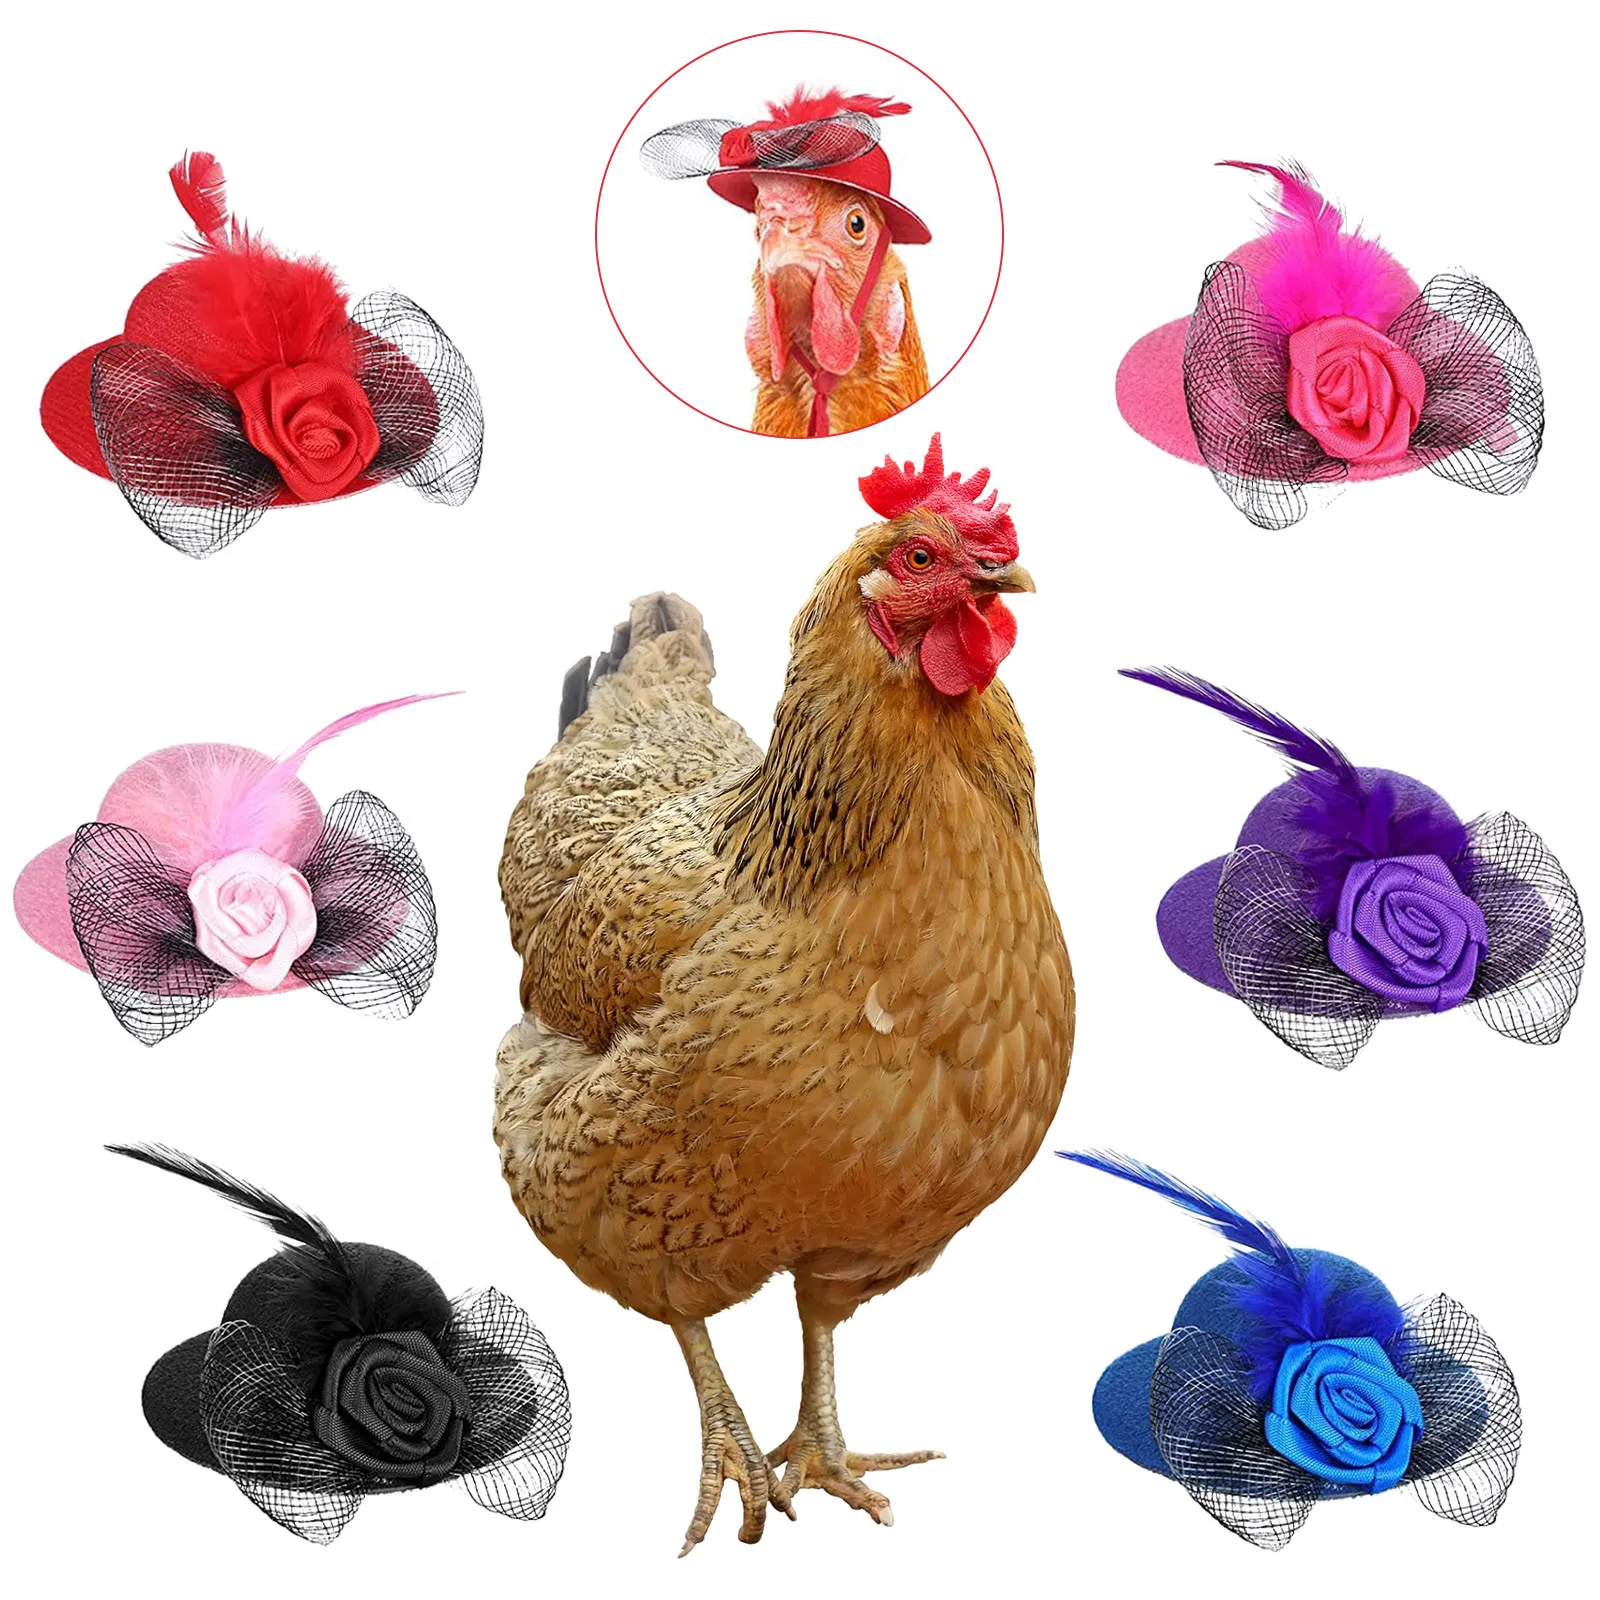 Vehomy 8Pcs Christmas Chicken Hats Scarves and Bowties for Hens Xmas Chicken Santa Claus Hat Woolen Hat with Adjustable Chin Strap Chicken Bow tie Scarf for Poultry Hen Rooster Duck Parrot 